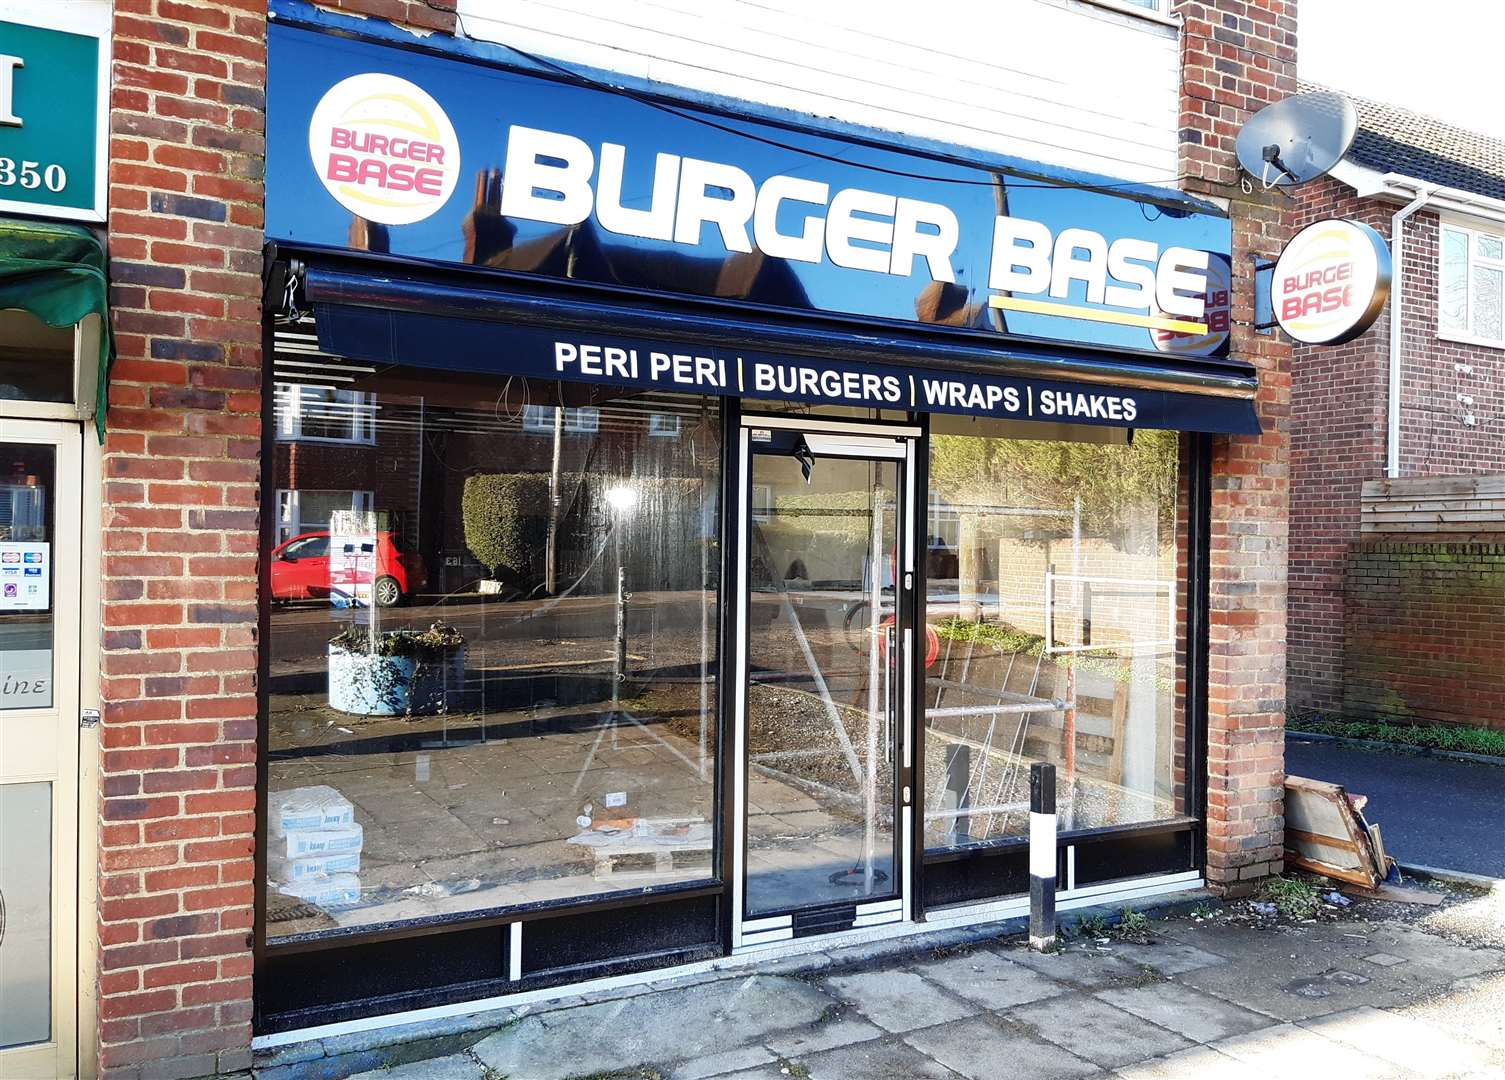 How the Burger Base site looked in January - before the site's owner was forced to take the signs down